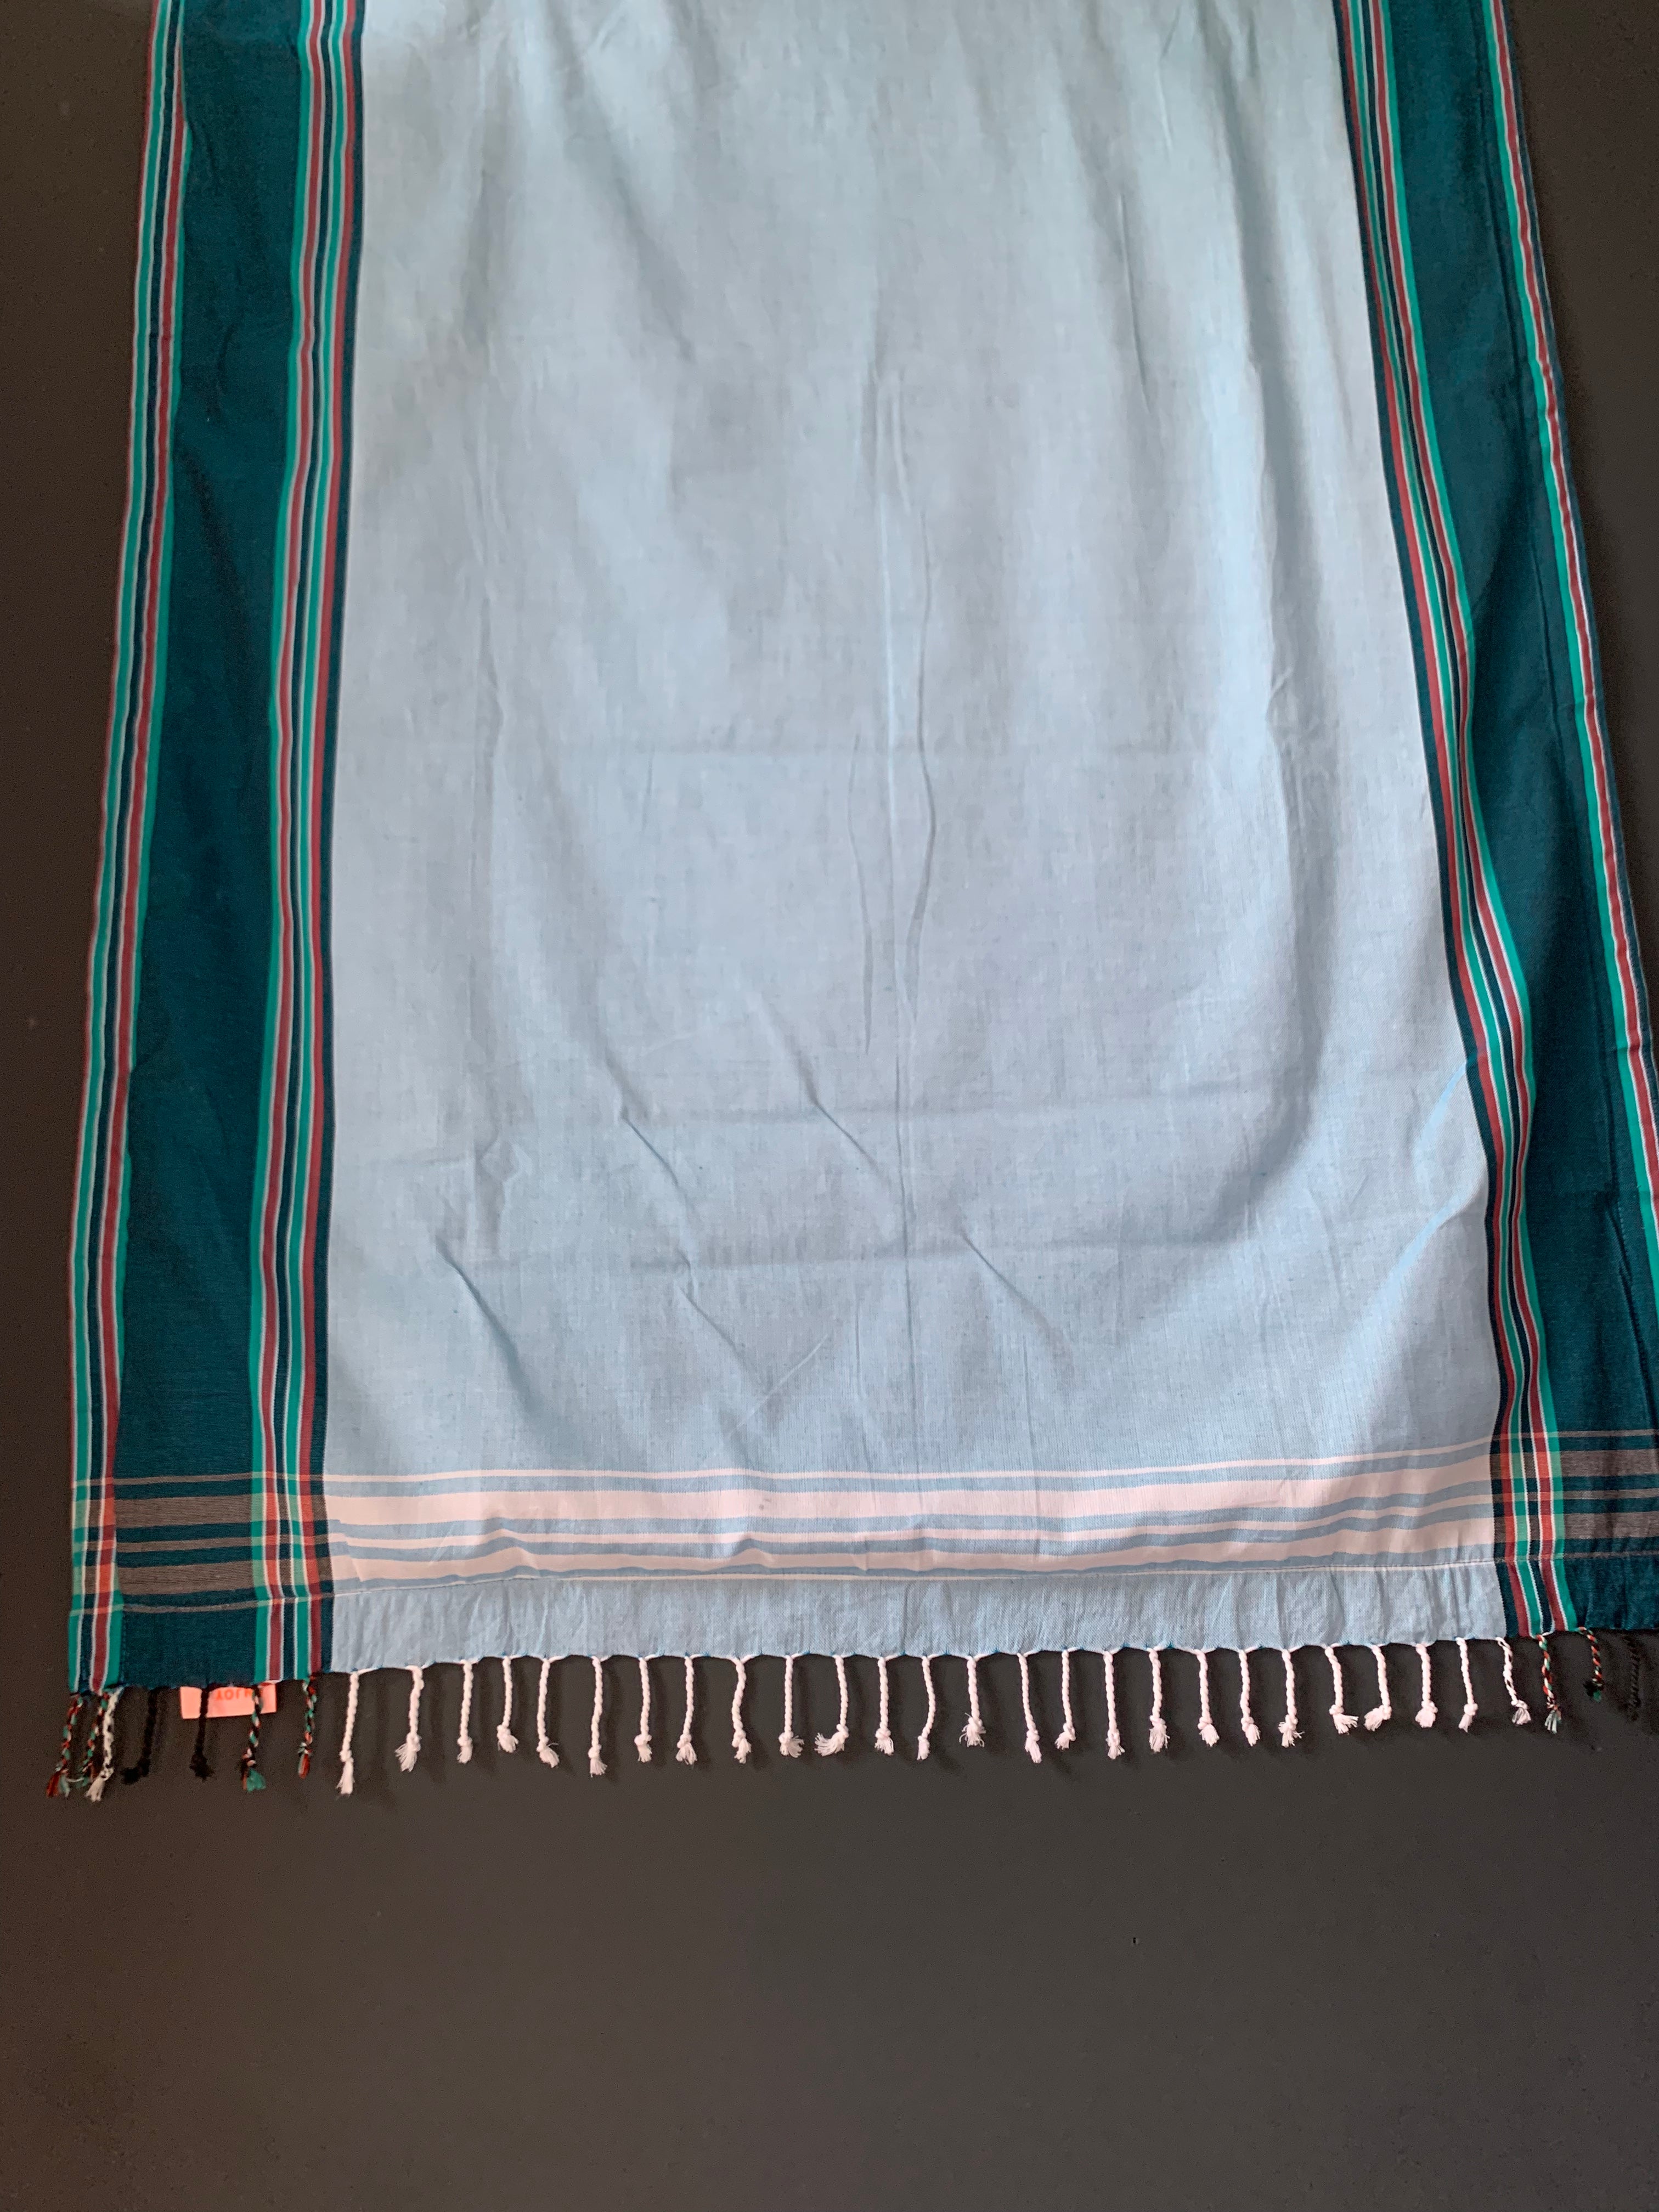 Kikoi Strandtuch light blue with blue/red/green frame and light blue towel